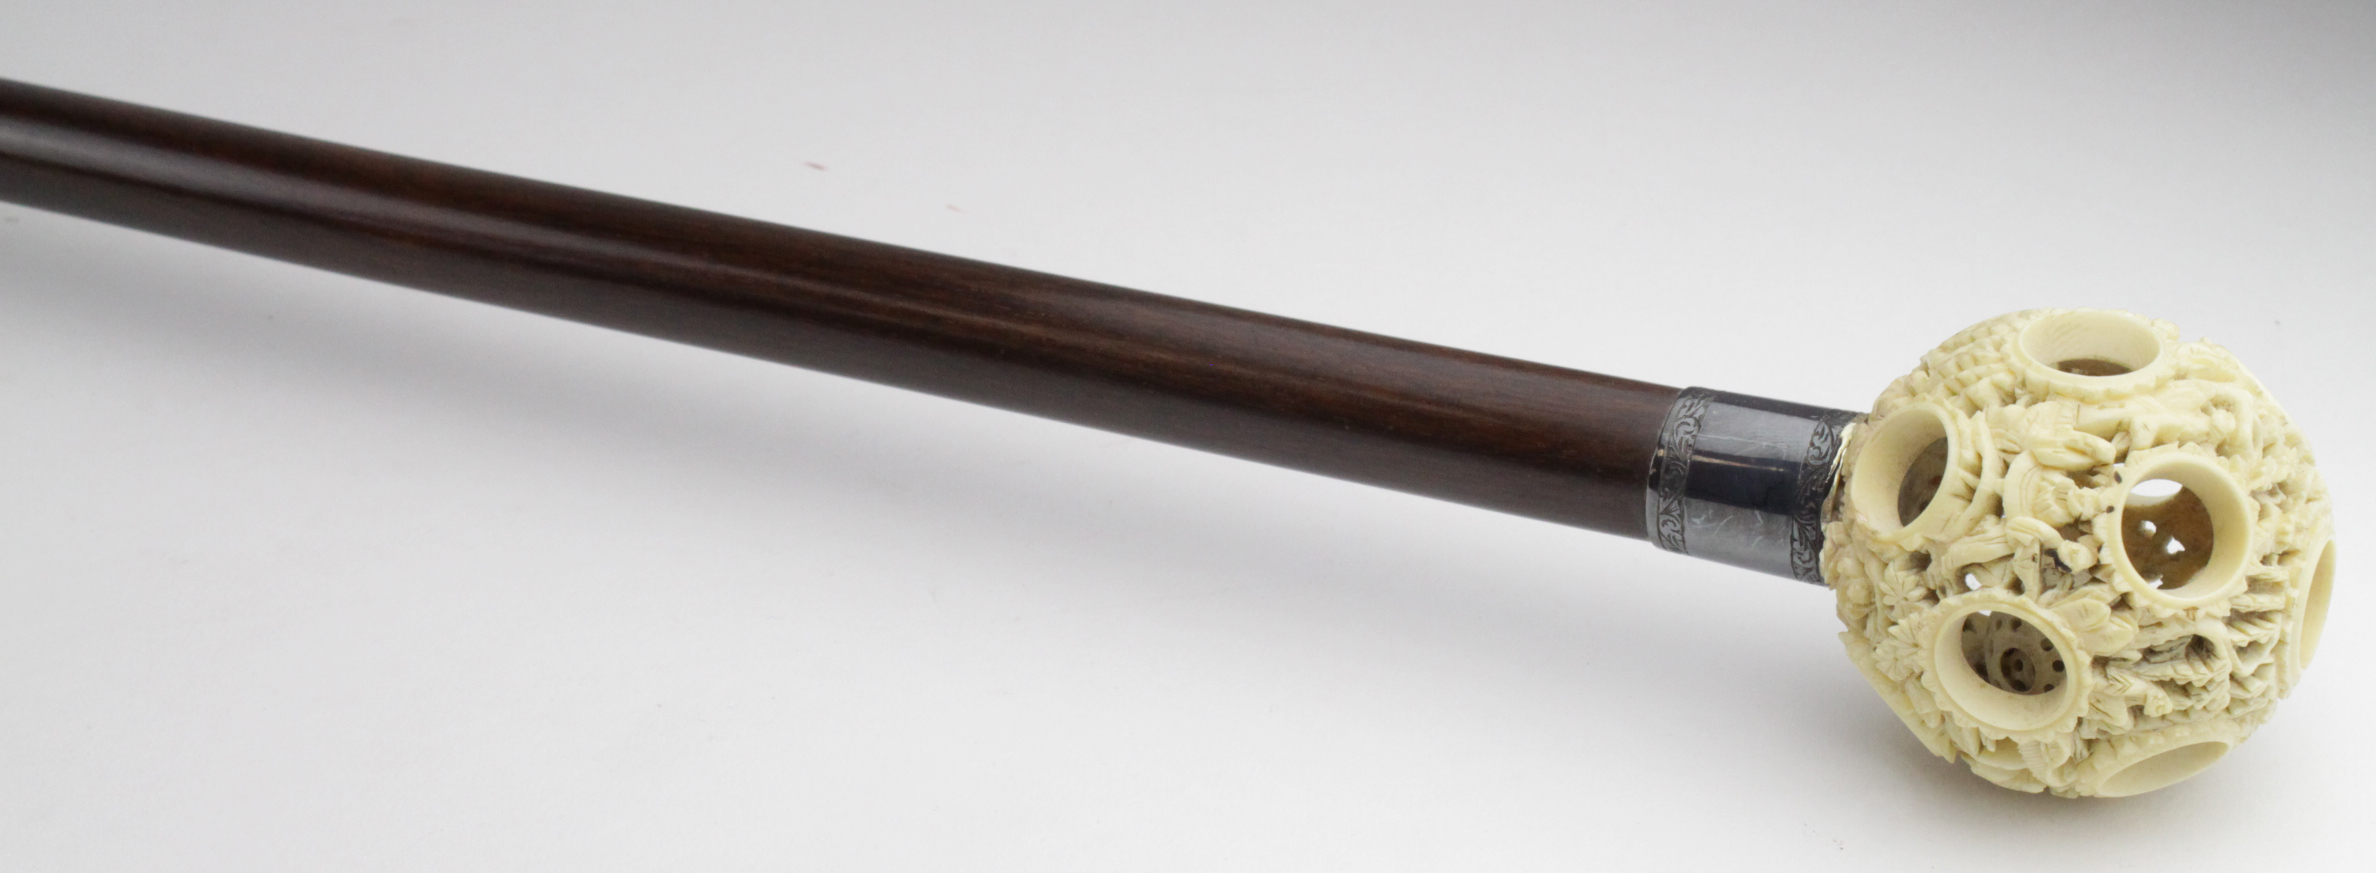 Walking Cane. A walking cane with Japanese puzzle ball knop, circa 19th Century, on rosewood